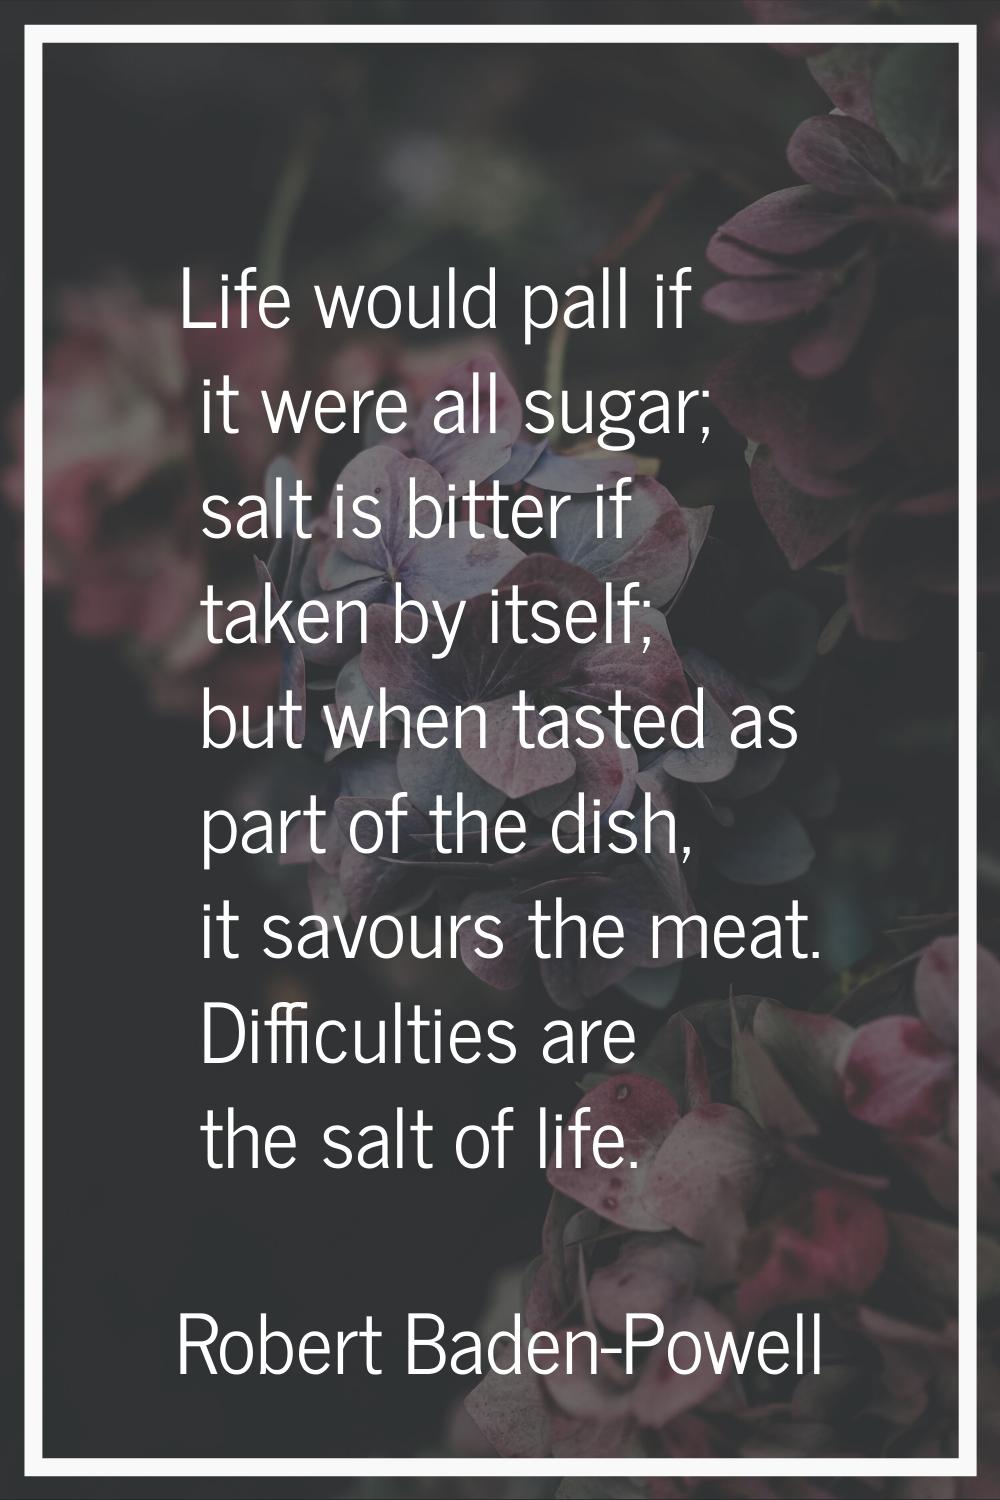 Life would pall if it were all sugar; salt is bitter if taken by itself; but when tasted as part of